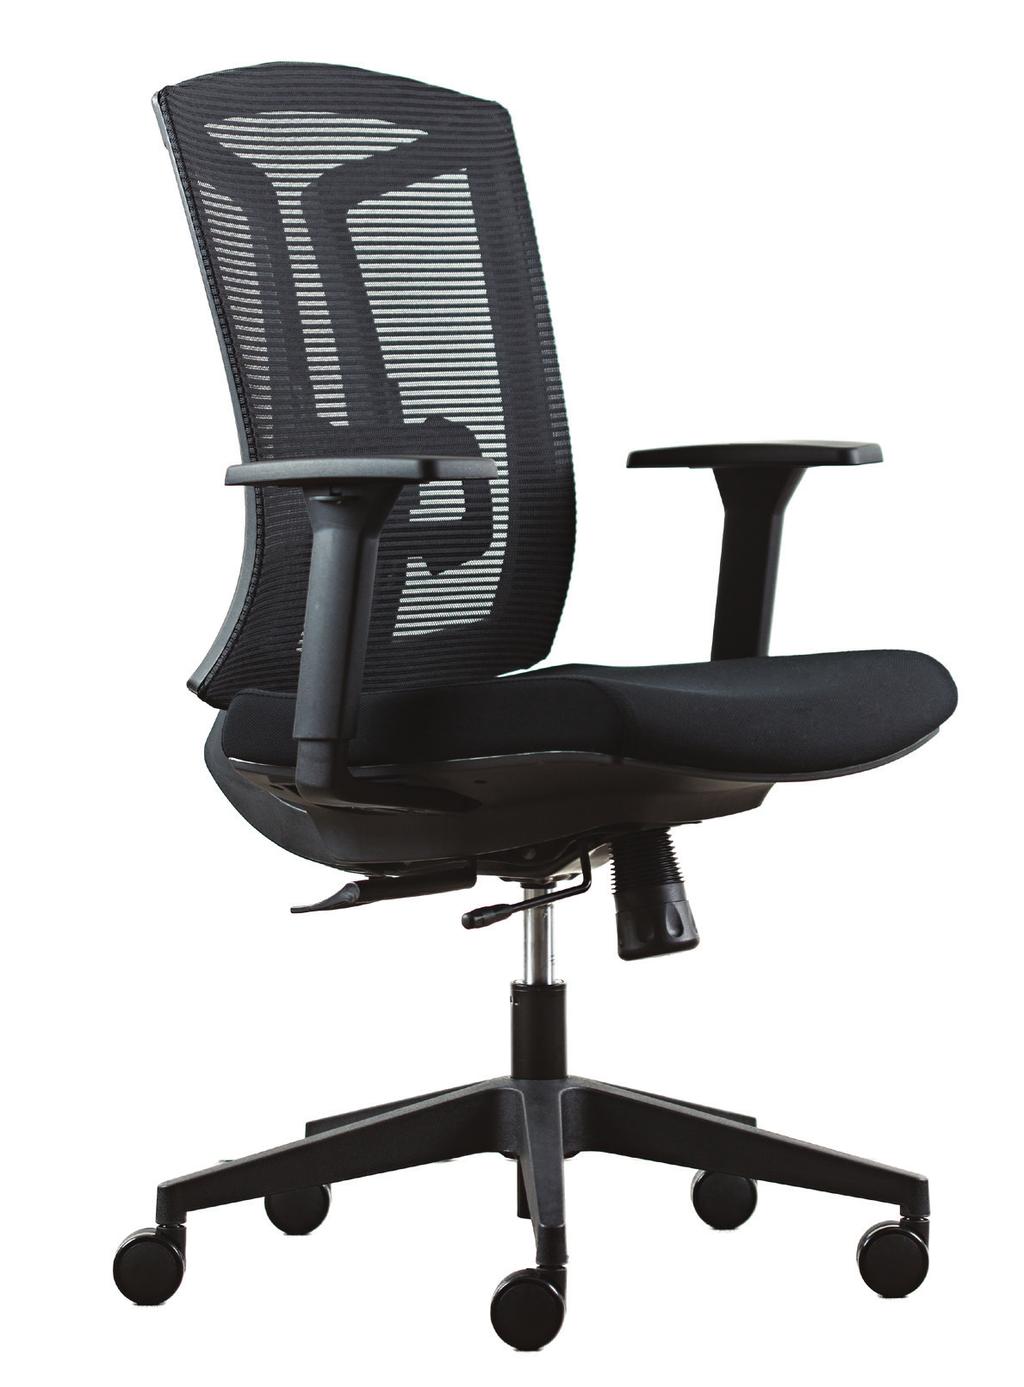 ECO-MB-GR Dimensions: 26 W x 26 D x 37.75-41.75 H List Price: $449 per chair Recommended Max.